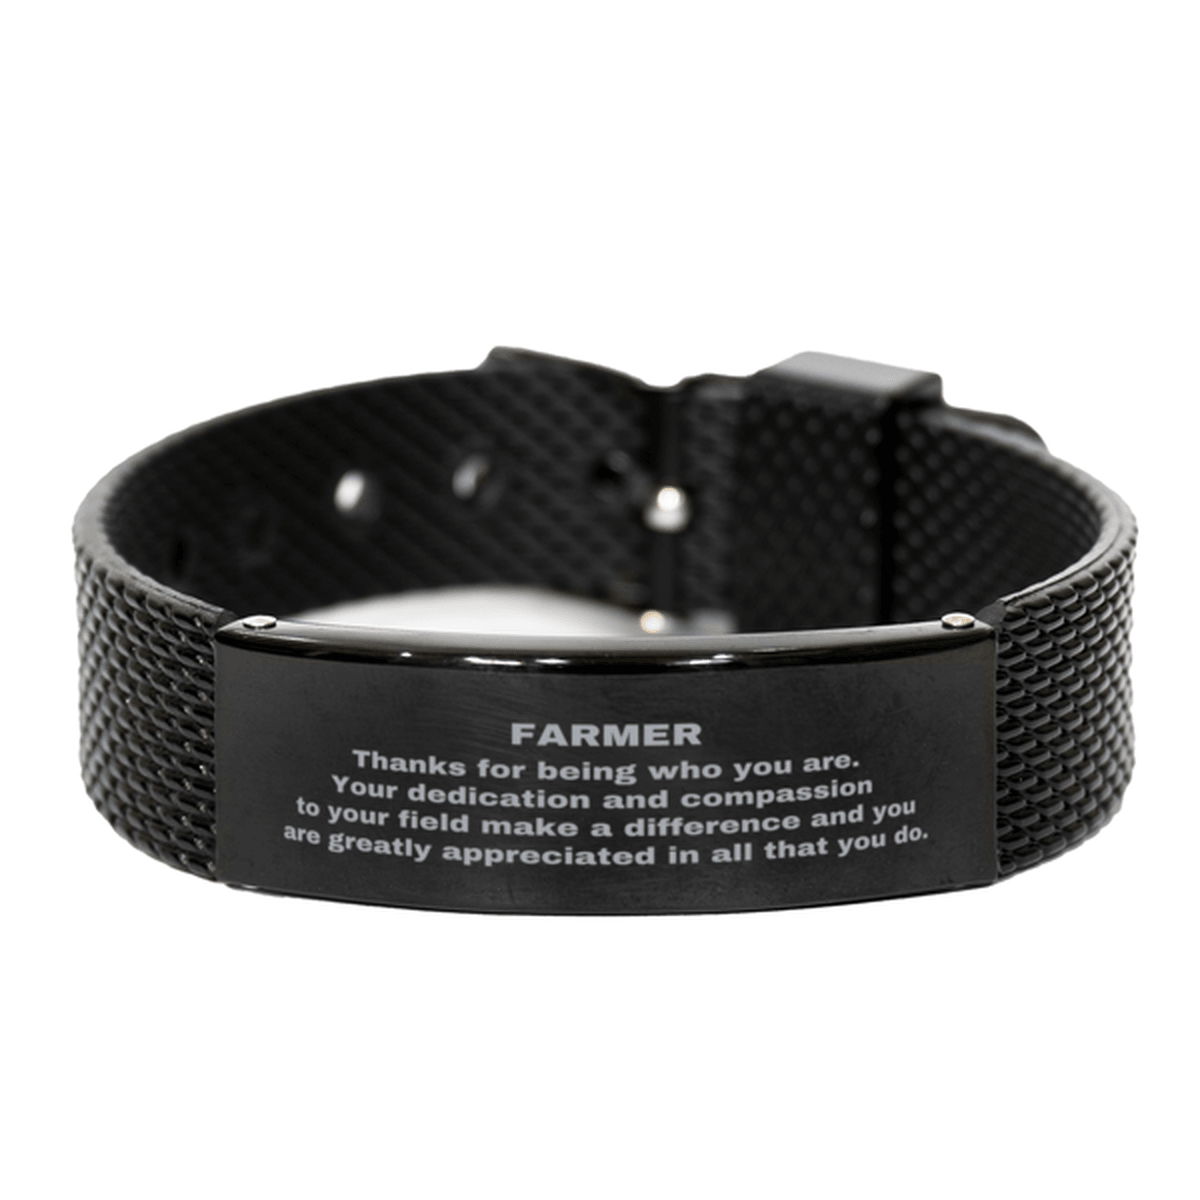 Farmer Black Shark Mesh Stainless Steel Engraved Bracelet - Thanks for being who you are - Birthday Christmas Jewelry Gifts Coworkers Colleague Boss - Mallard Moon Gift Shop